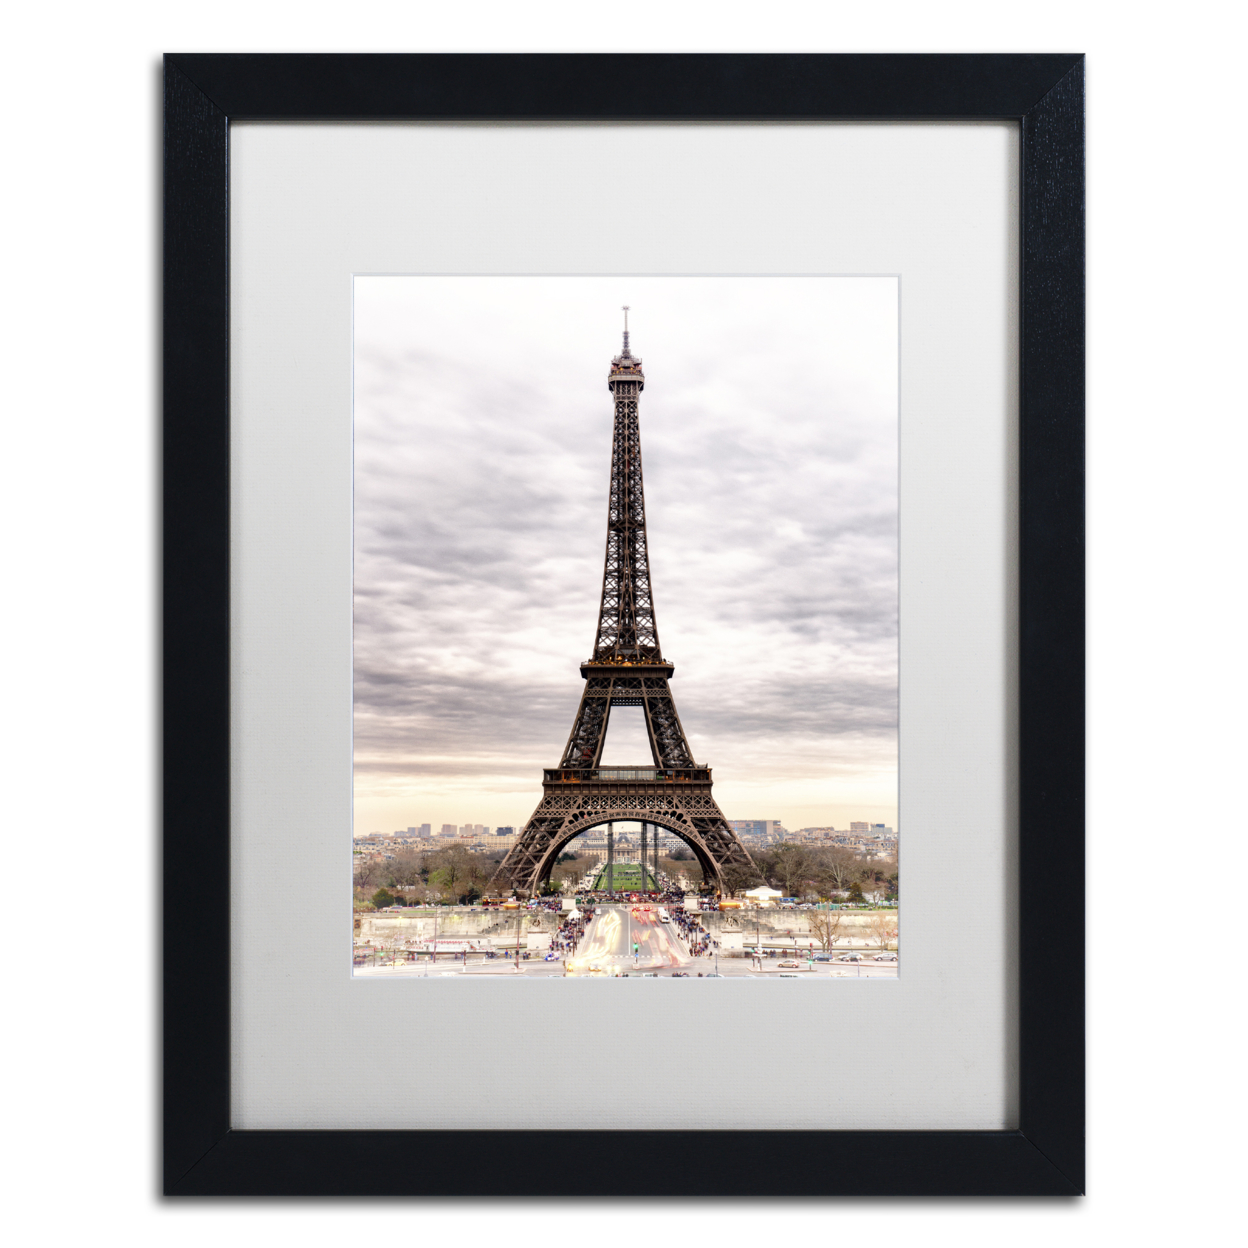 Philippe Hugonnard 'The Eiffel Tower' Black Wooden Framed Art 18 X 22 Inches